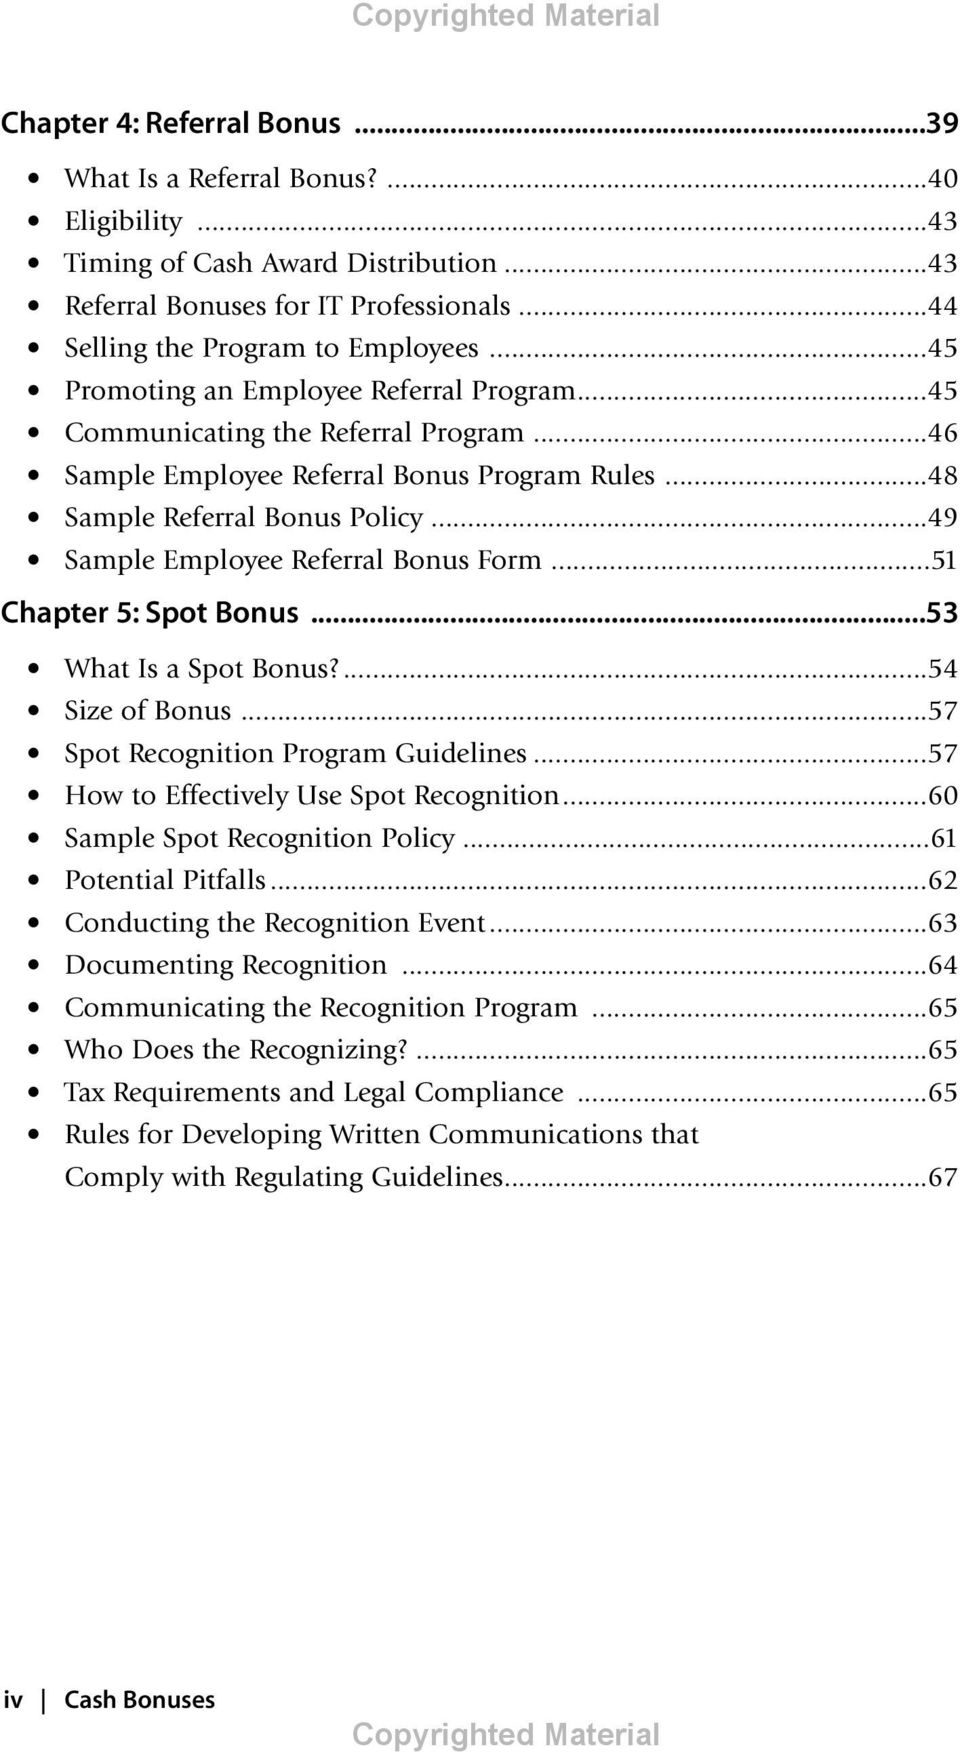 ..49 Sample Employee Referral Bonus Form...51 Chapter 5: Spot Bonus...53 What Is a Spot Bonus?...54 Size of Bonus...57 Spot Recognition Program Guidelines...57 How to Effectively Use Spot Recognition.